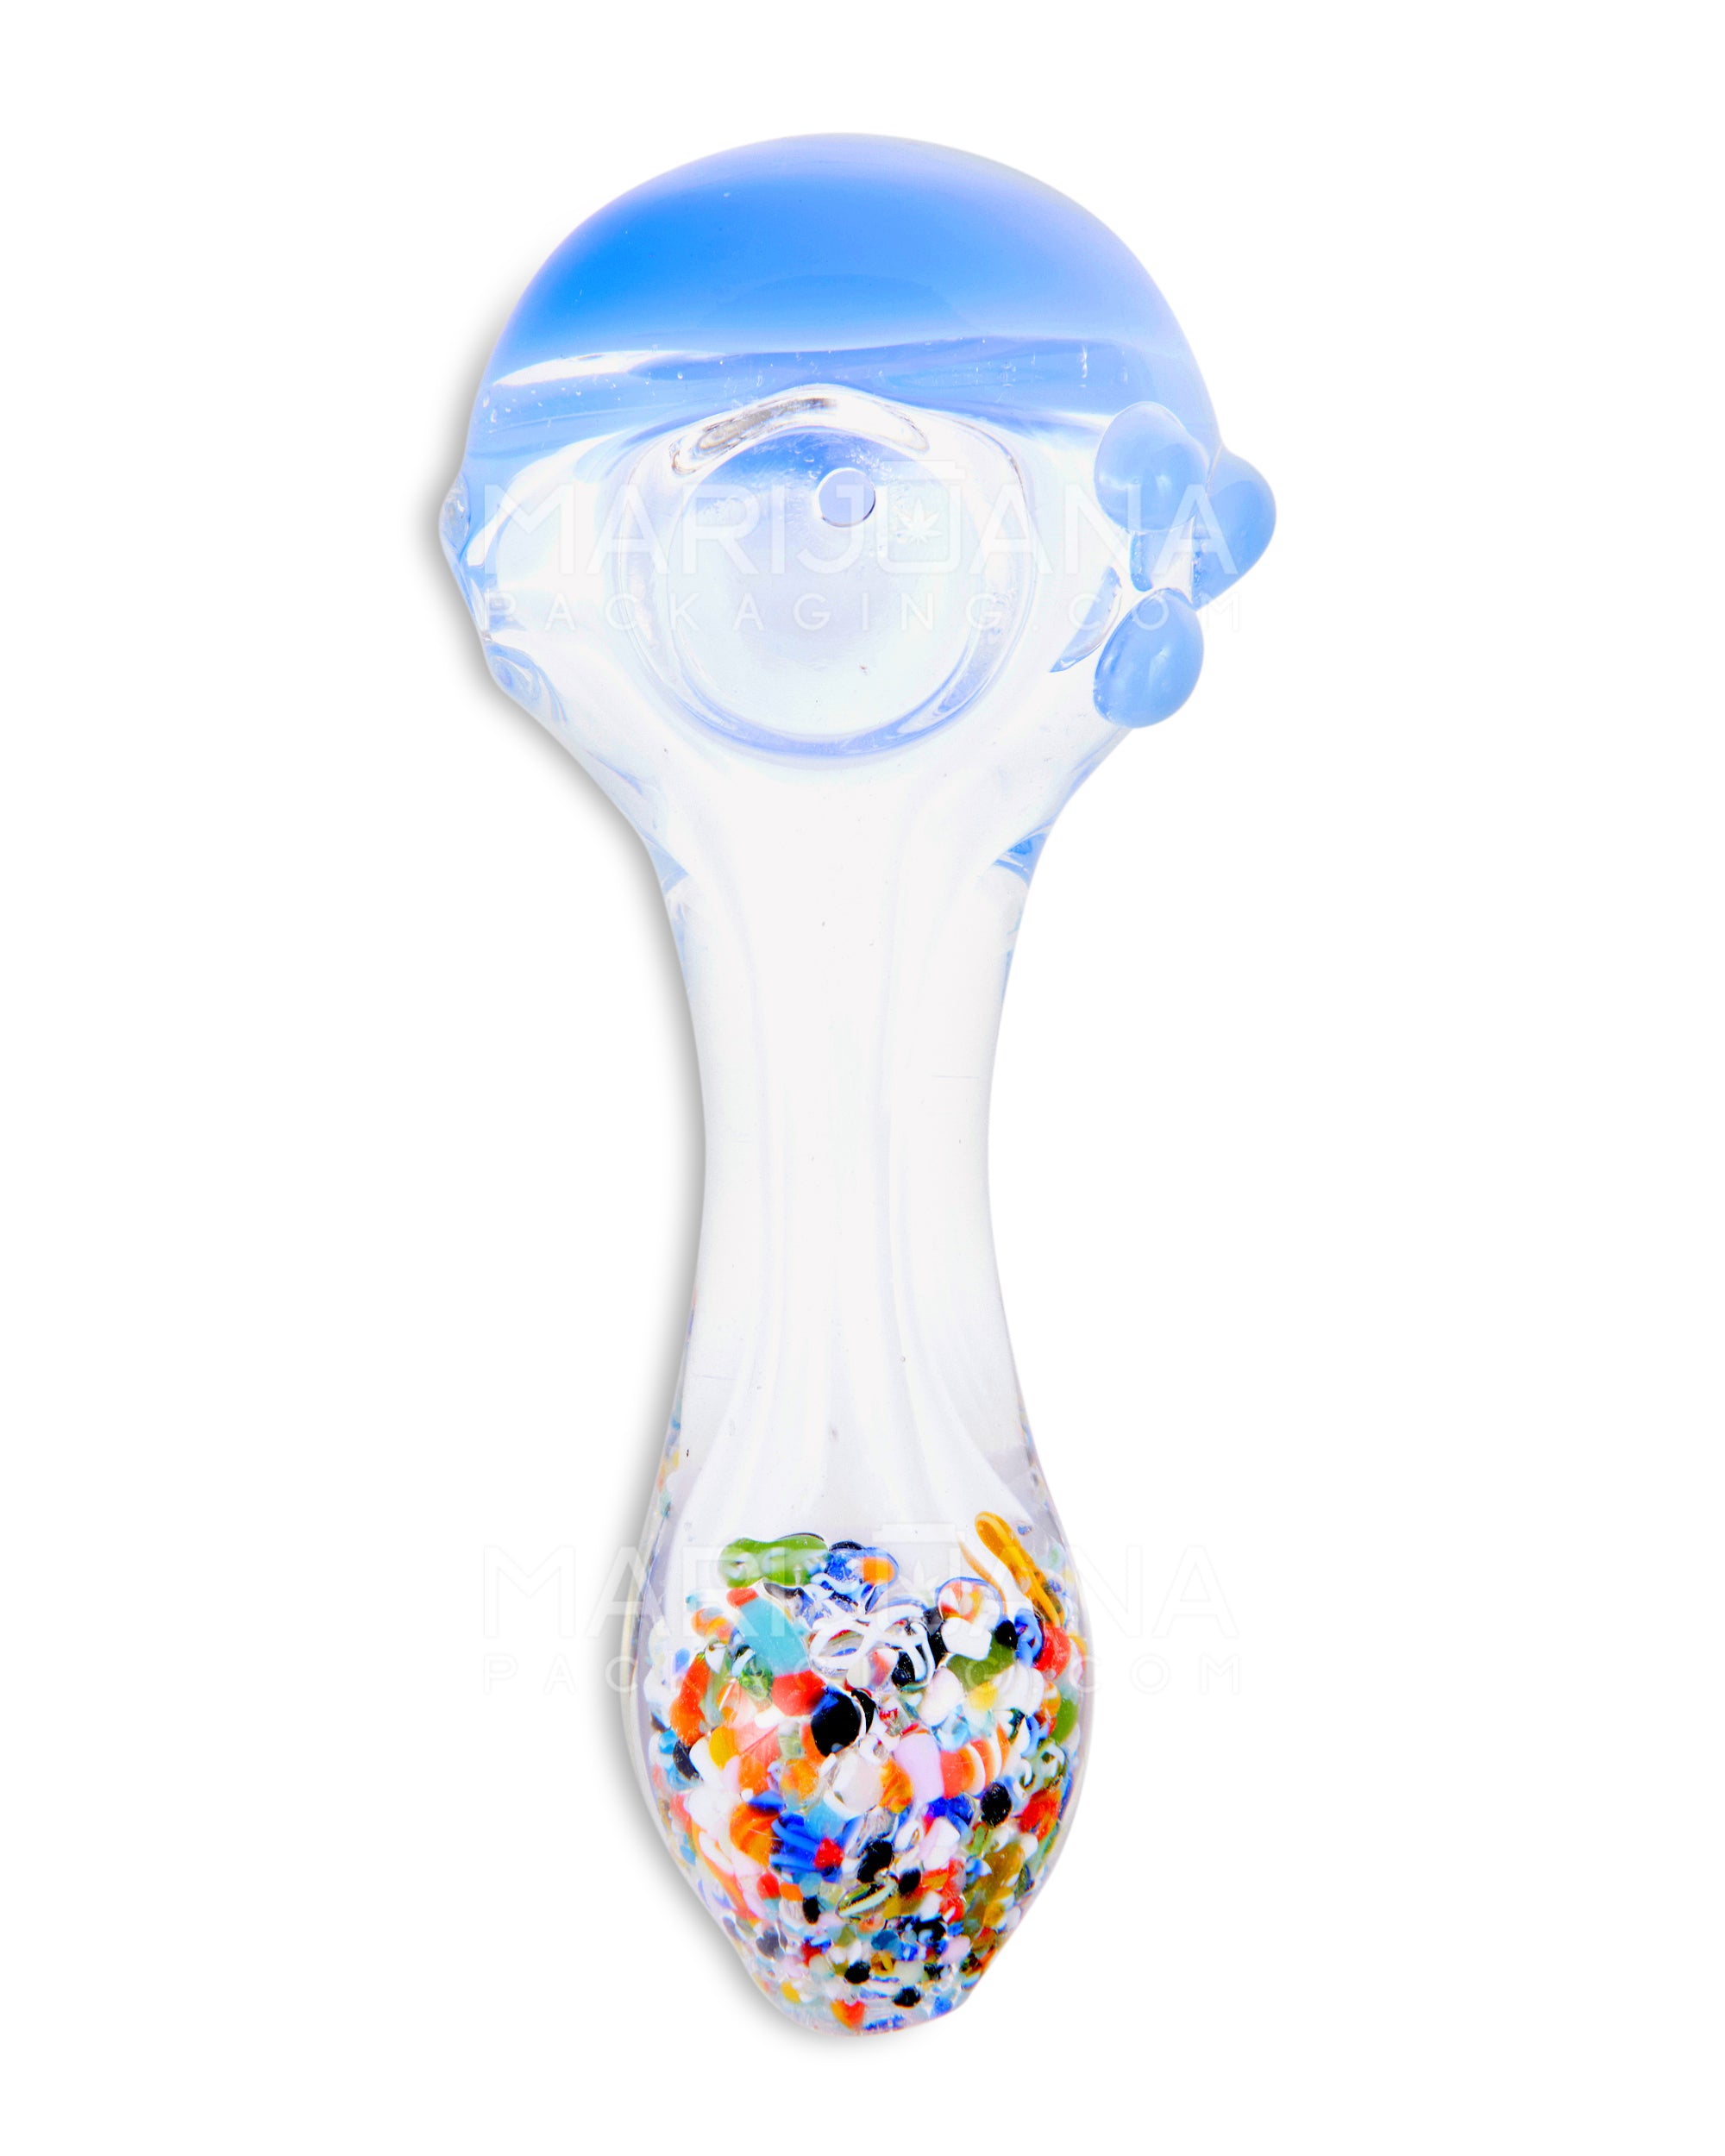 Fritted Mouthpiece Spoon Hand Pipe w/ Colored Head | 5in Long - Glass - Assorted - 2